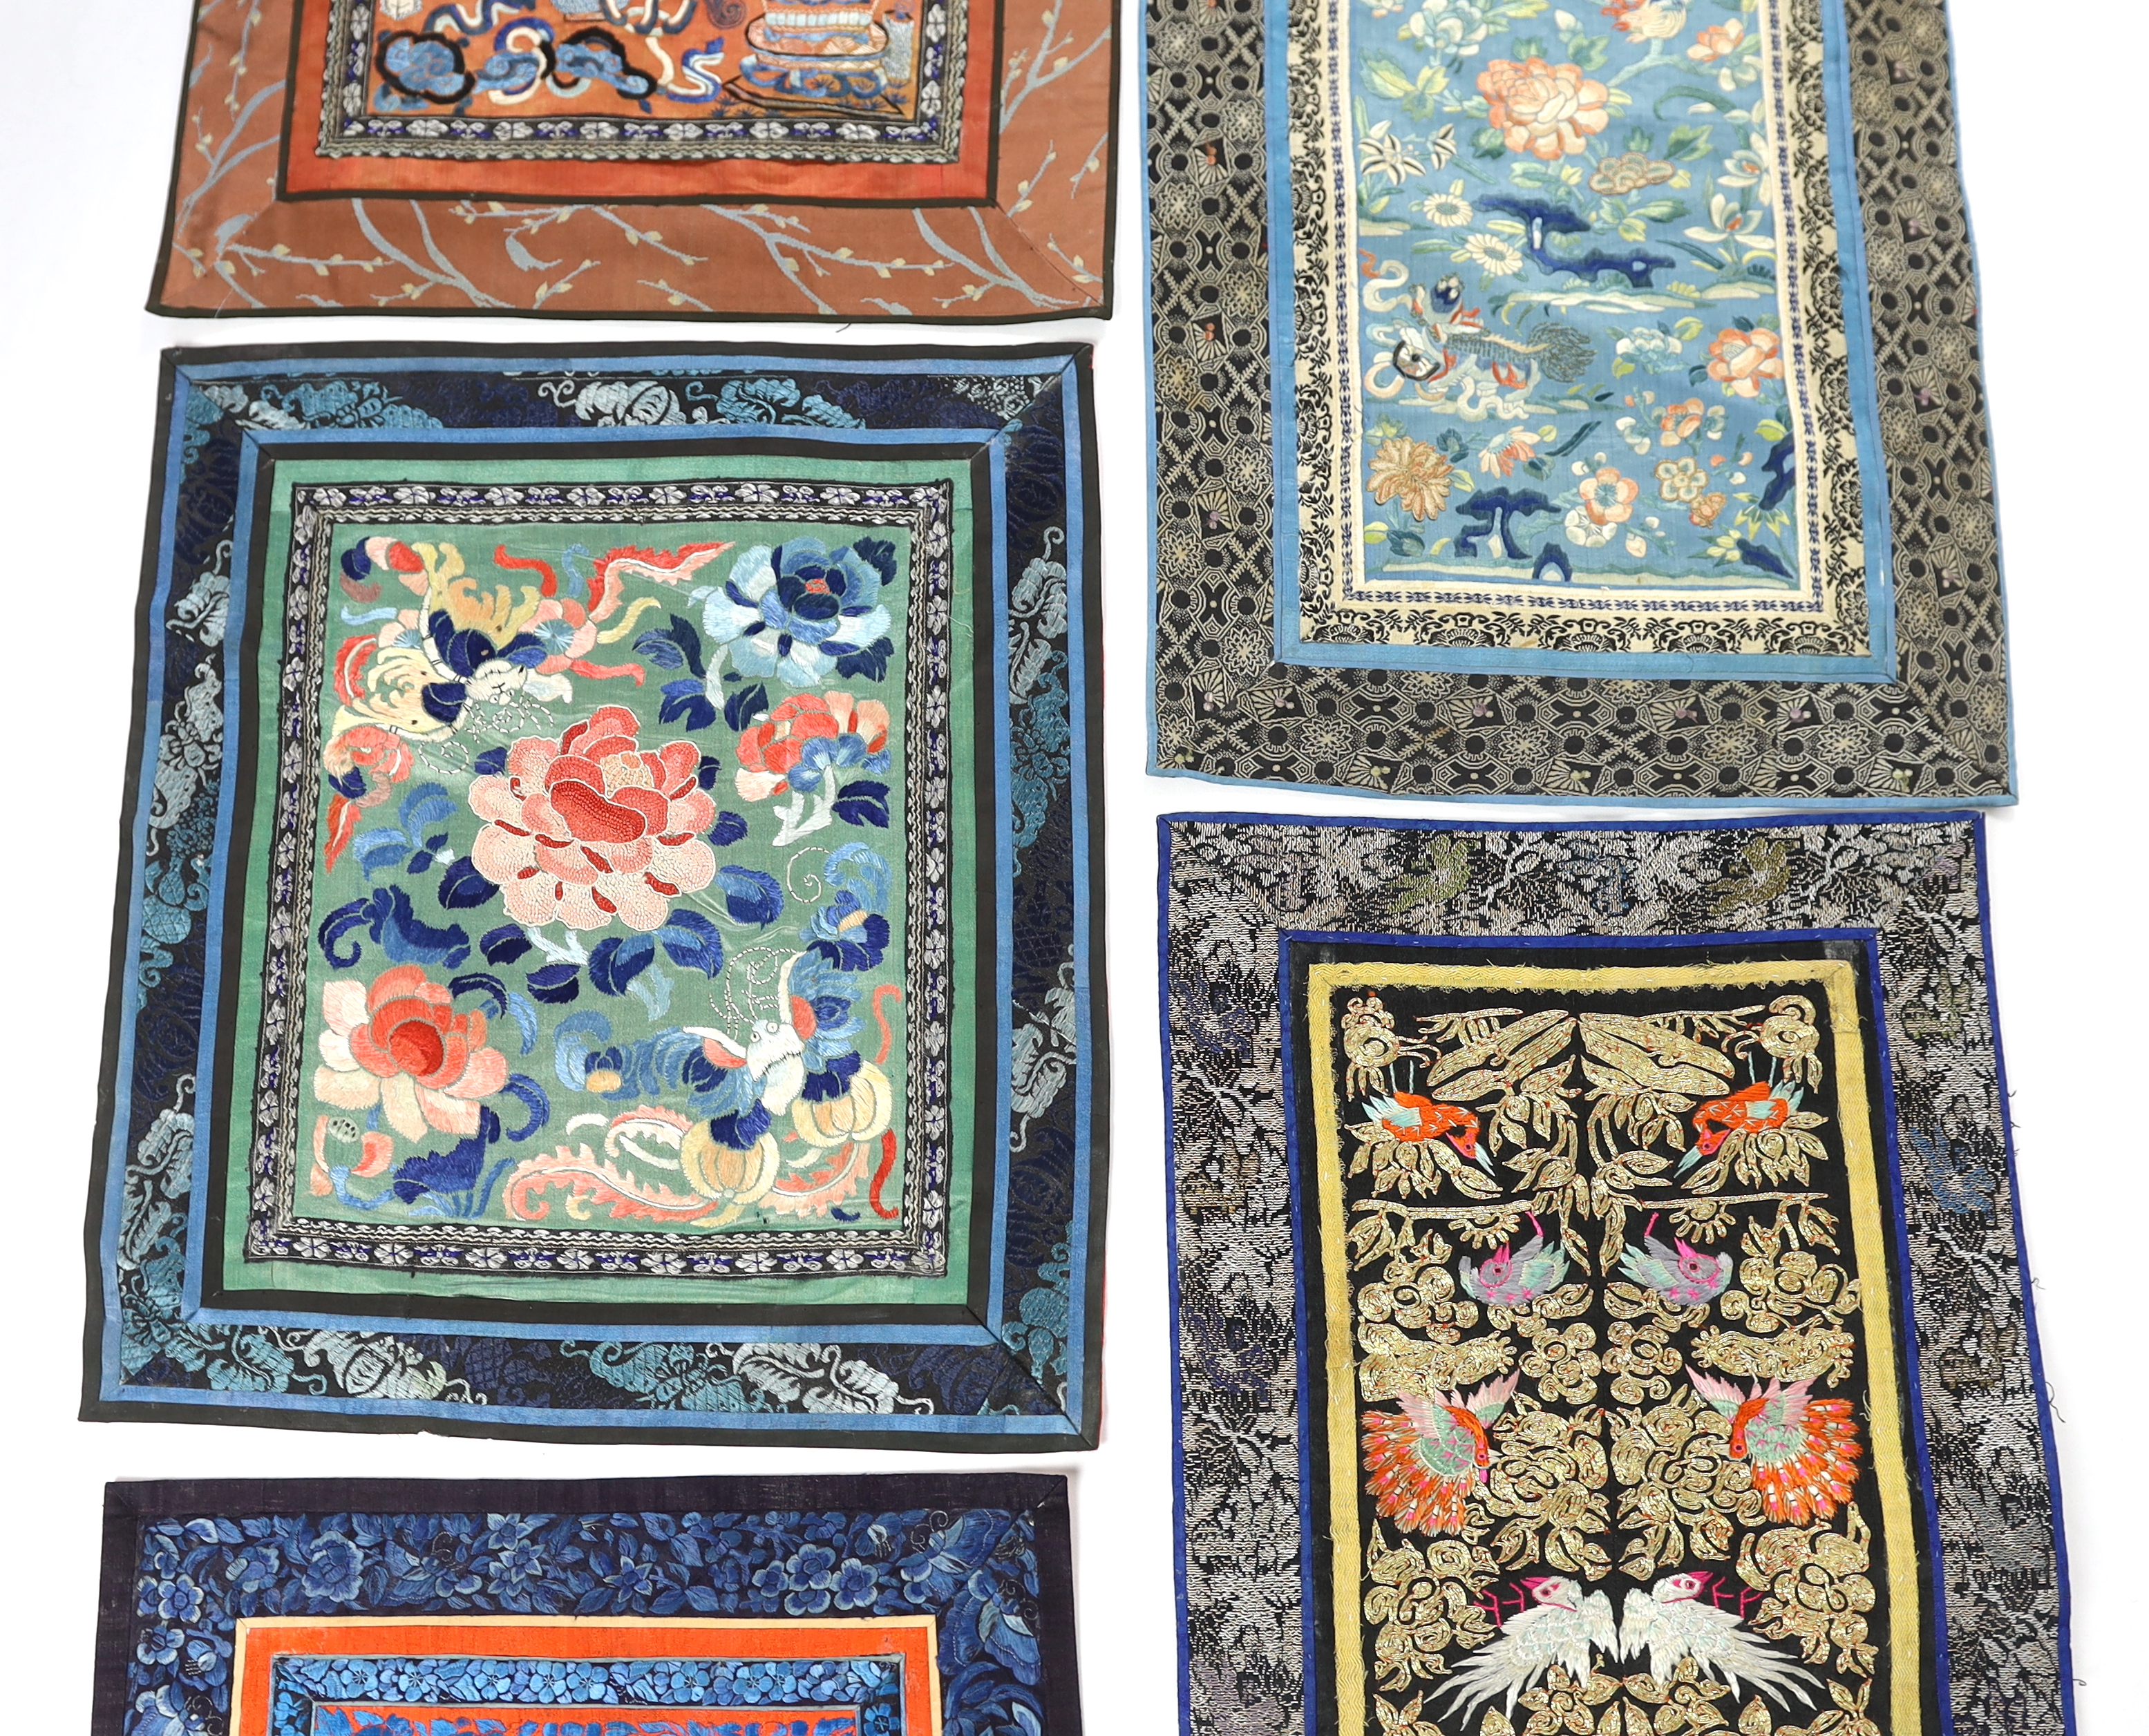 Five Chinese late Qing dynasty silk embroidered panels, two being embroidered with Beijing knot, a pair of metallic embroidered with phoenix sleeve bands, the other embroidered with butterflies and flowers, all five pane